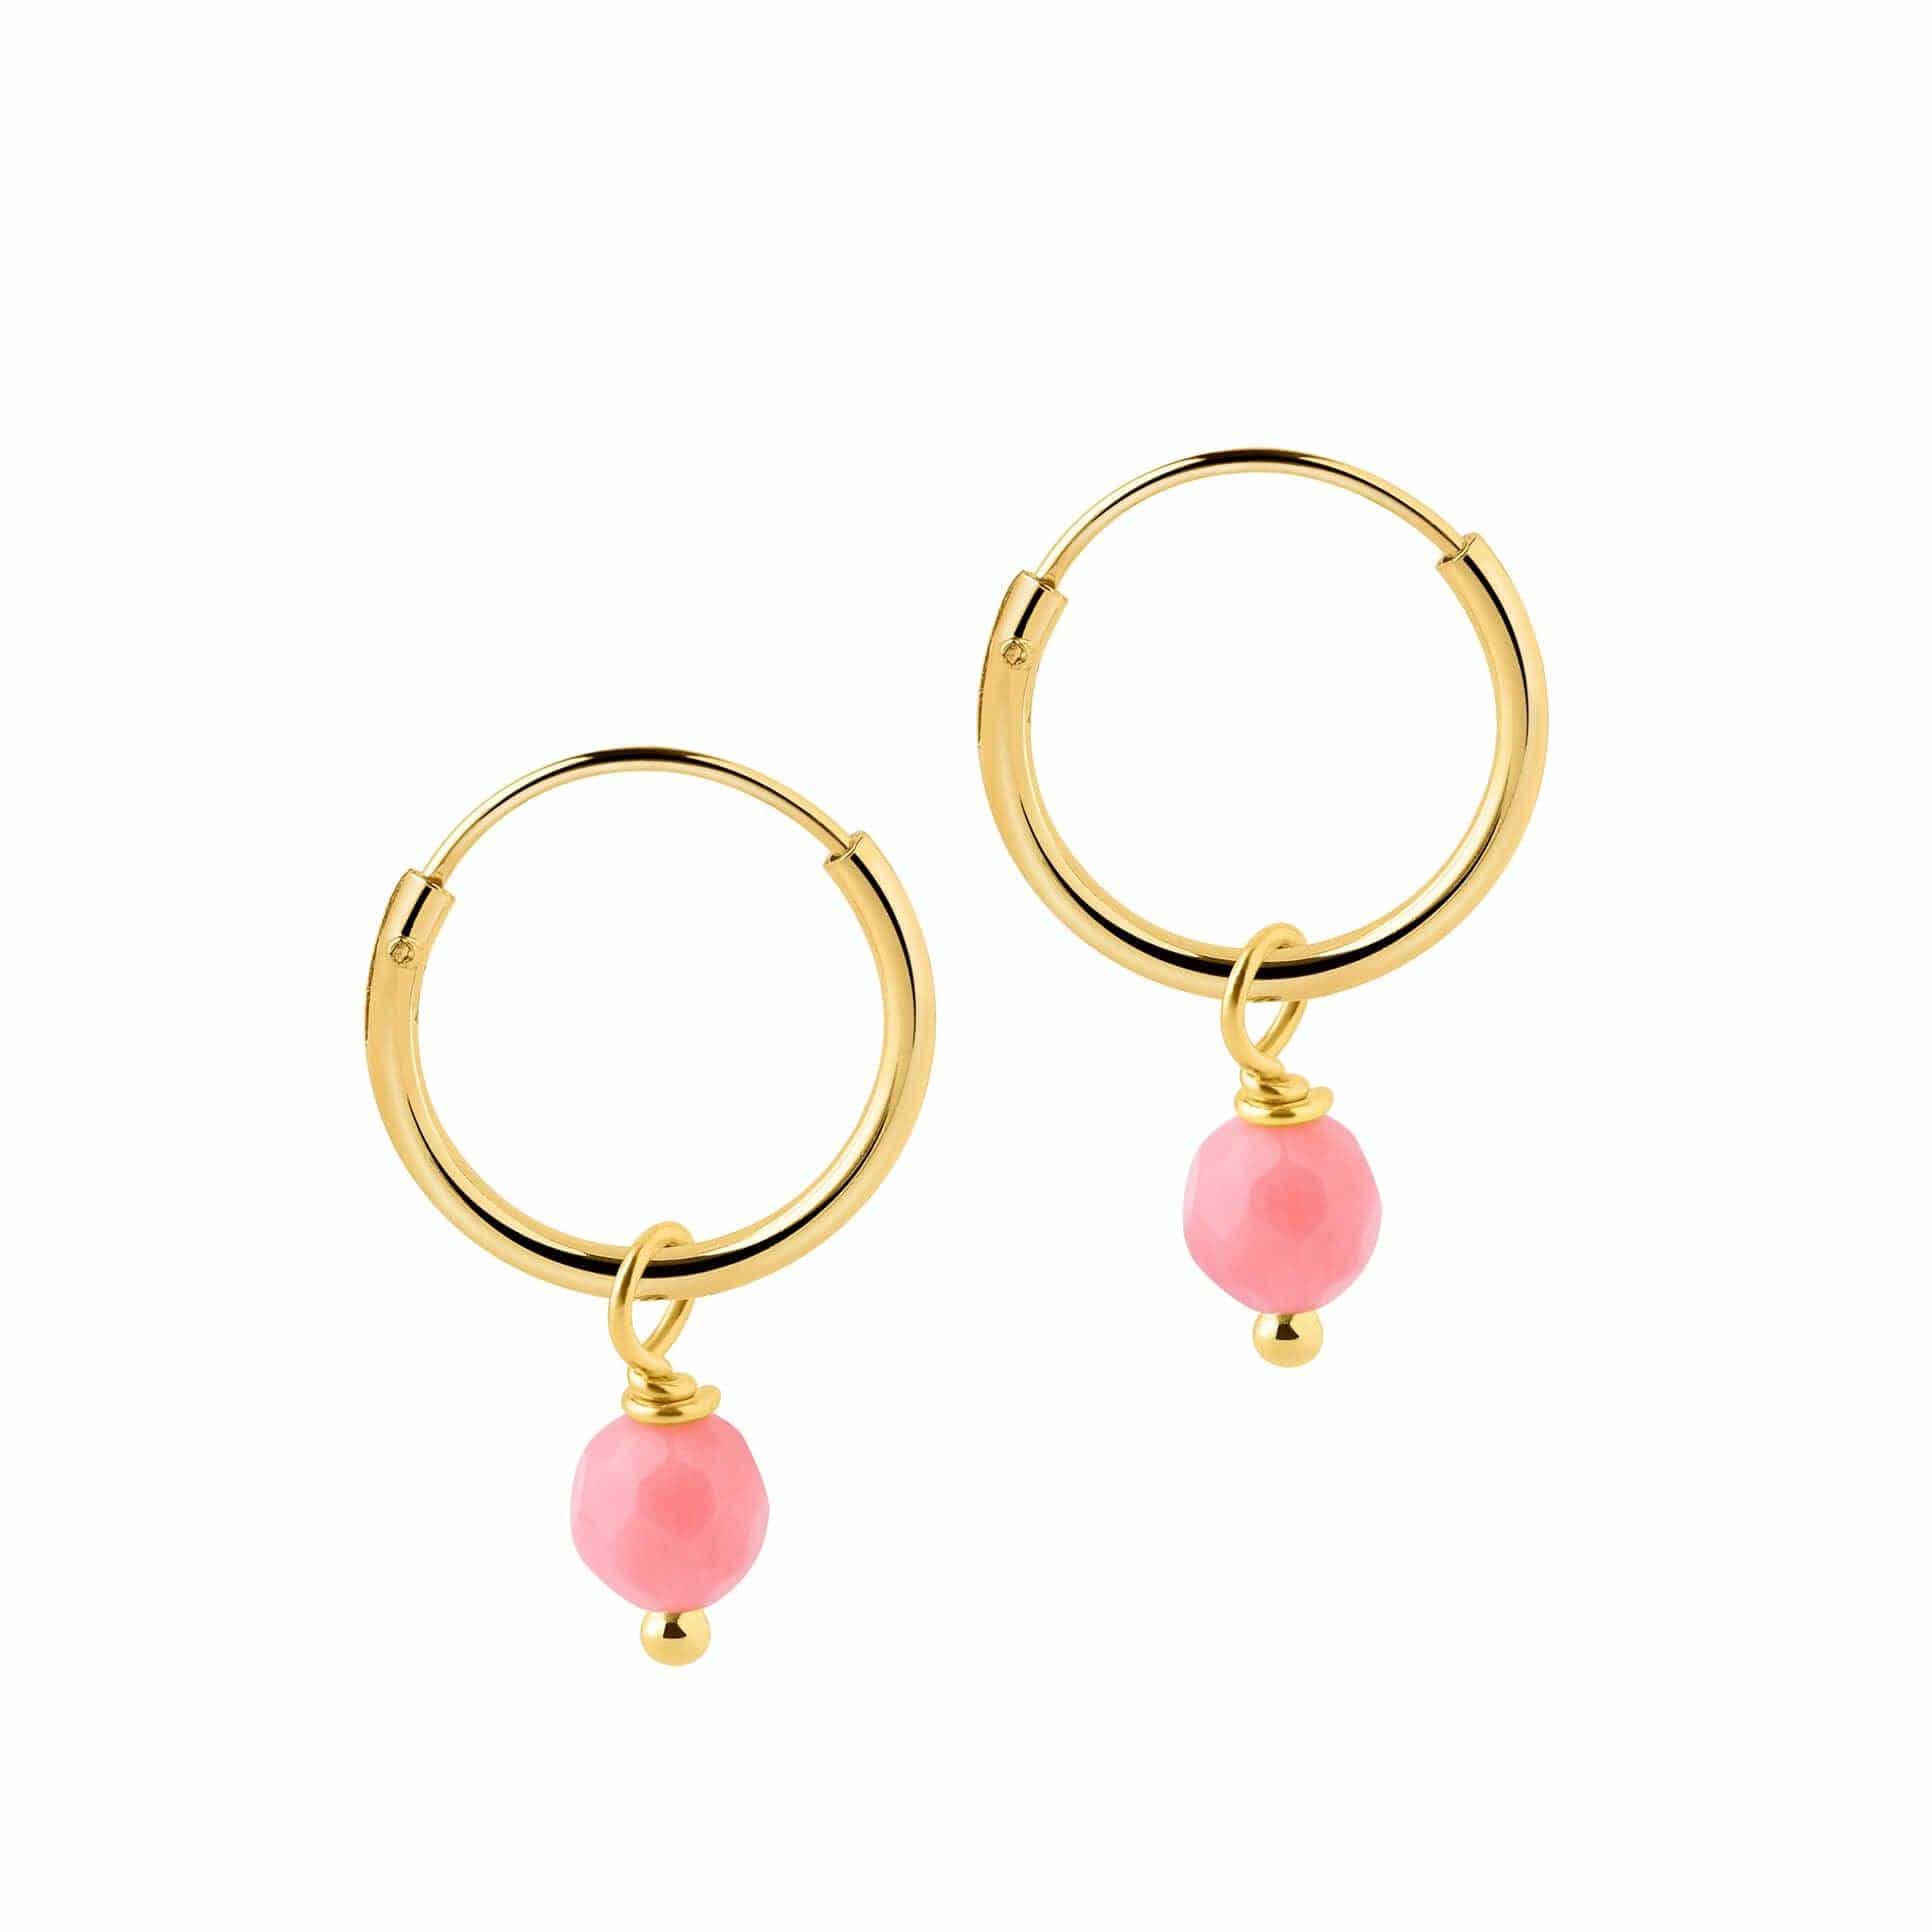 Small Gold Plated Hoop Earrings with Pink Stone